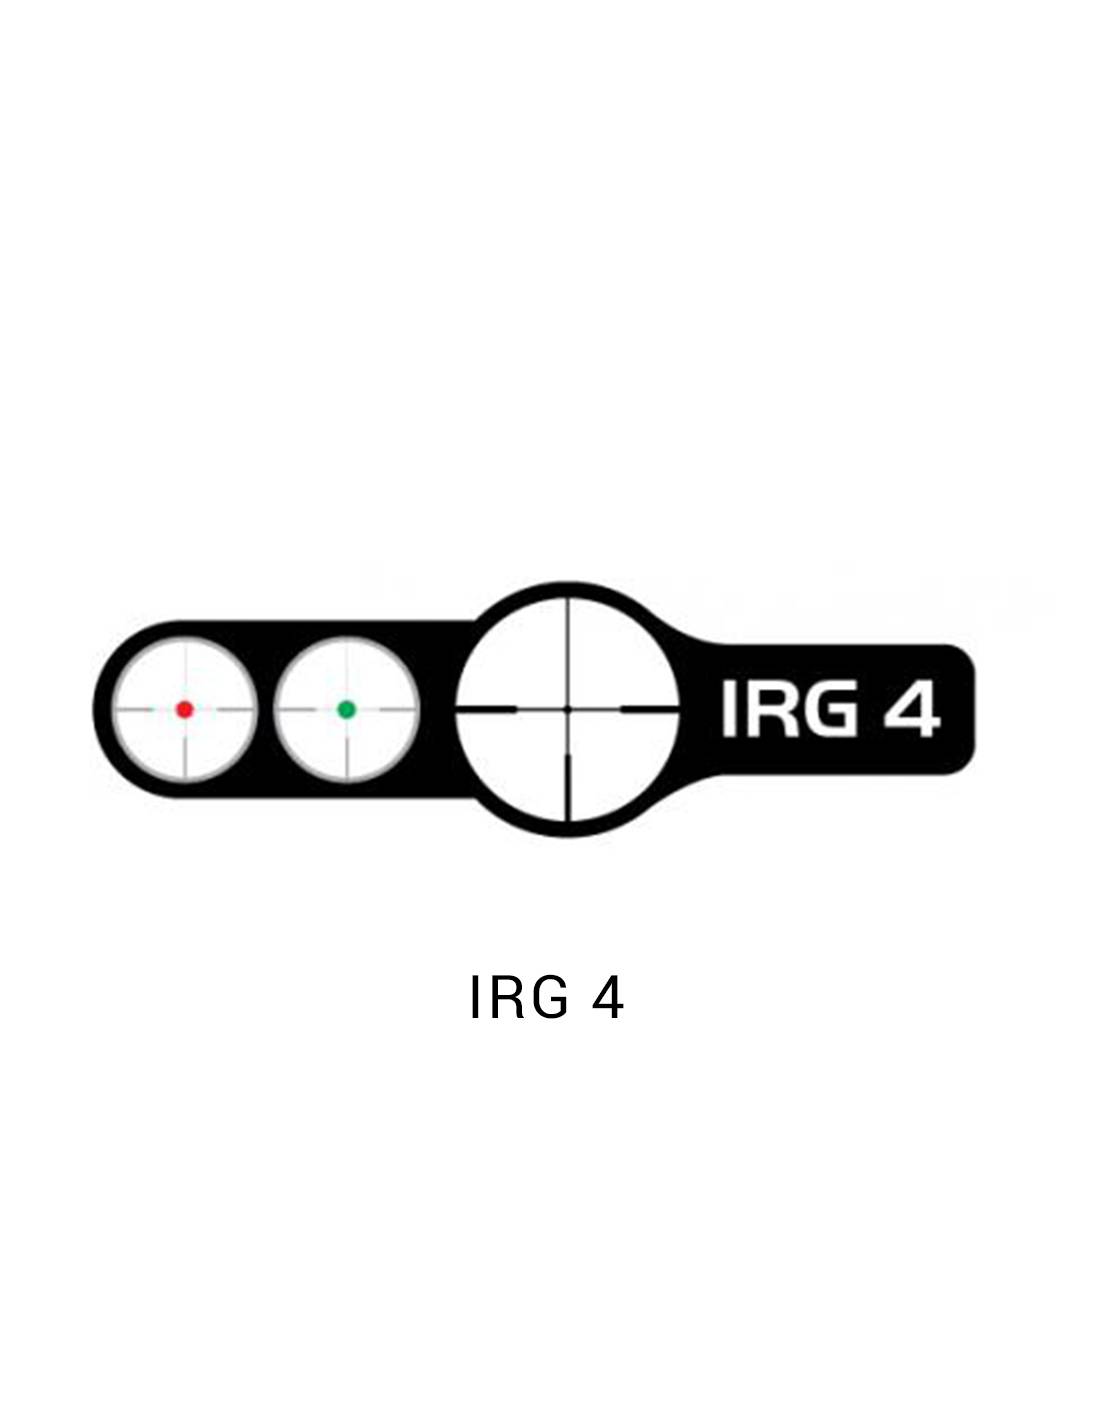 Gold Medal Hunting Scope with Illuminated Reticle